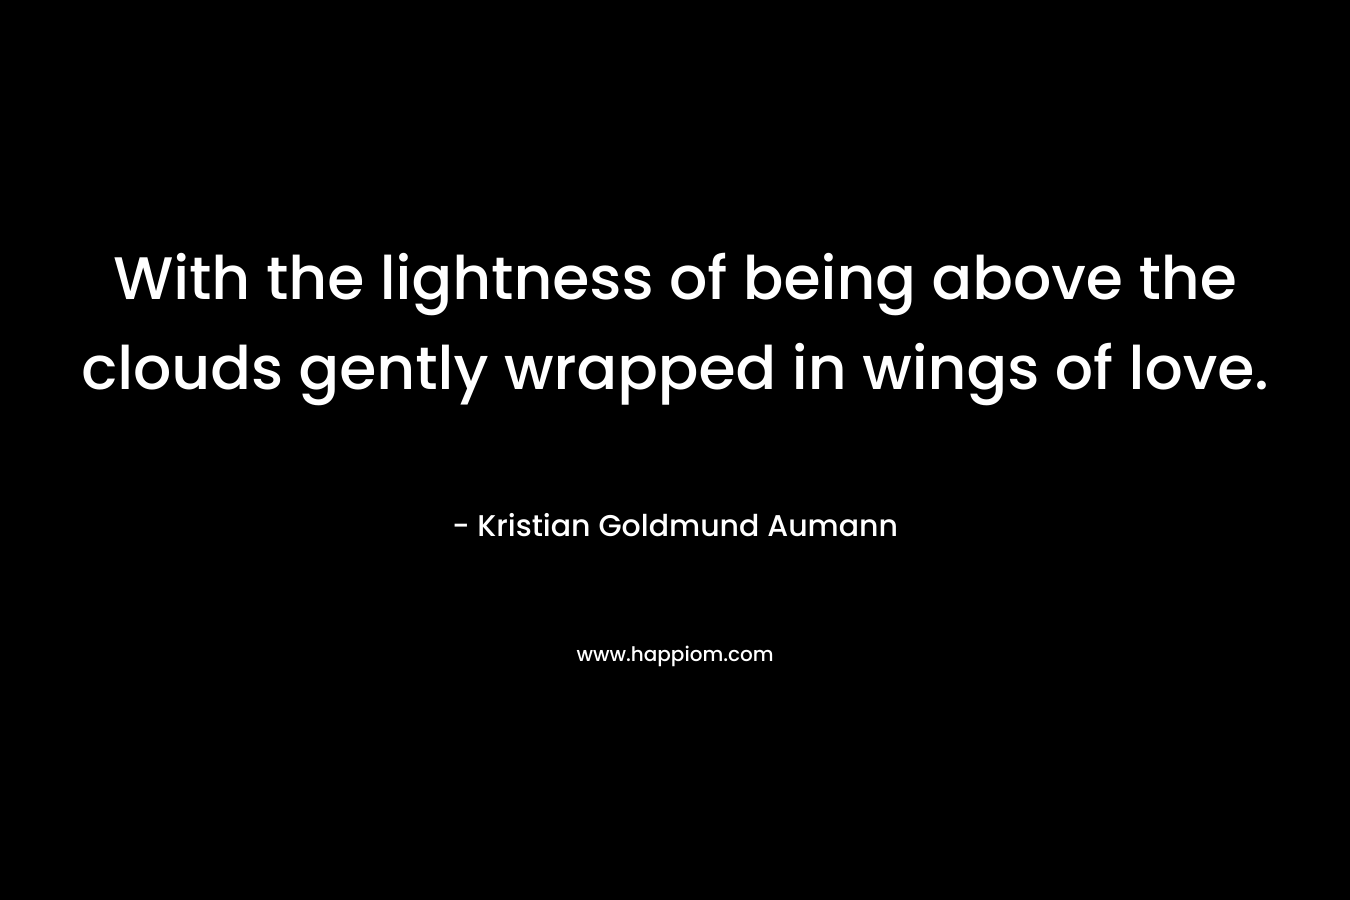 With the lightness of being above the clouds gently wrapped in wings of love. – Kristian Goldmund Aumann